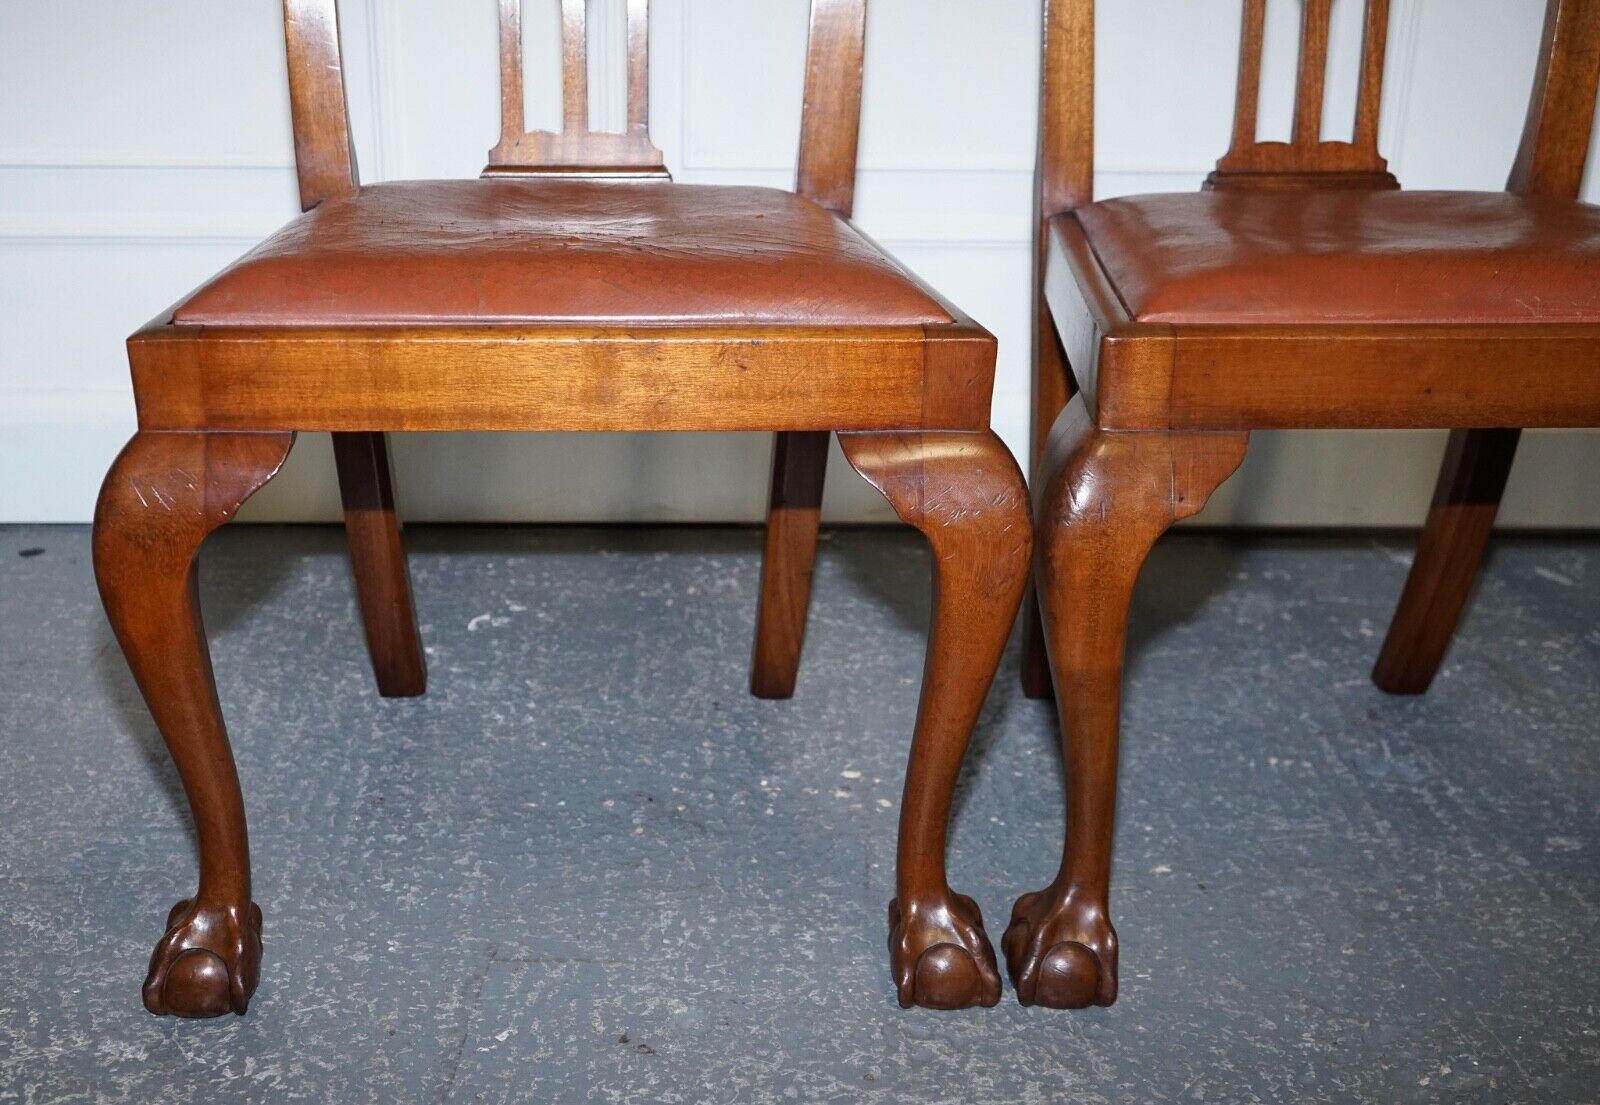 CHIPPENDALE STYLE 5 DINING CHAIRS WITH LEATHER SEATS PERFECT FOR ROUND TABLE